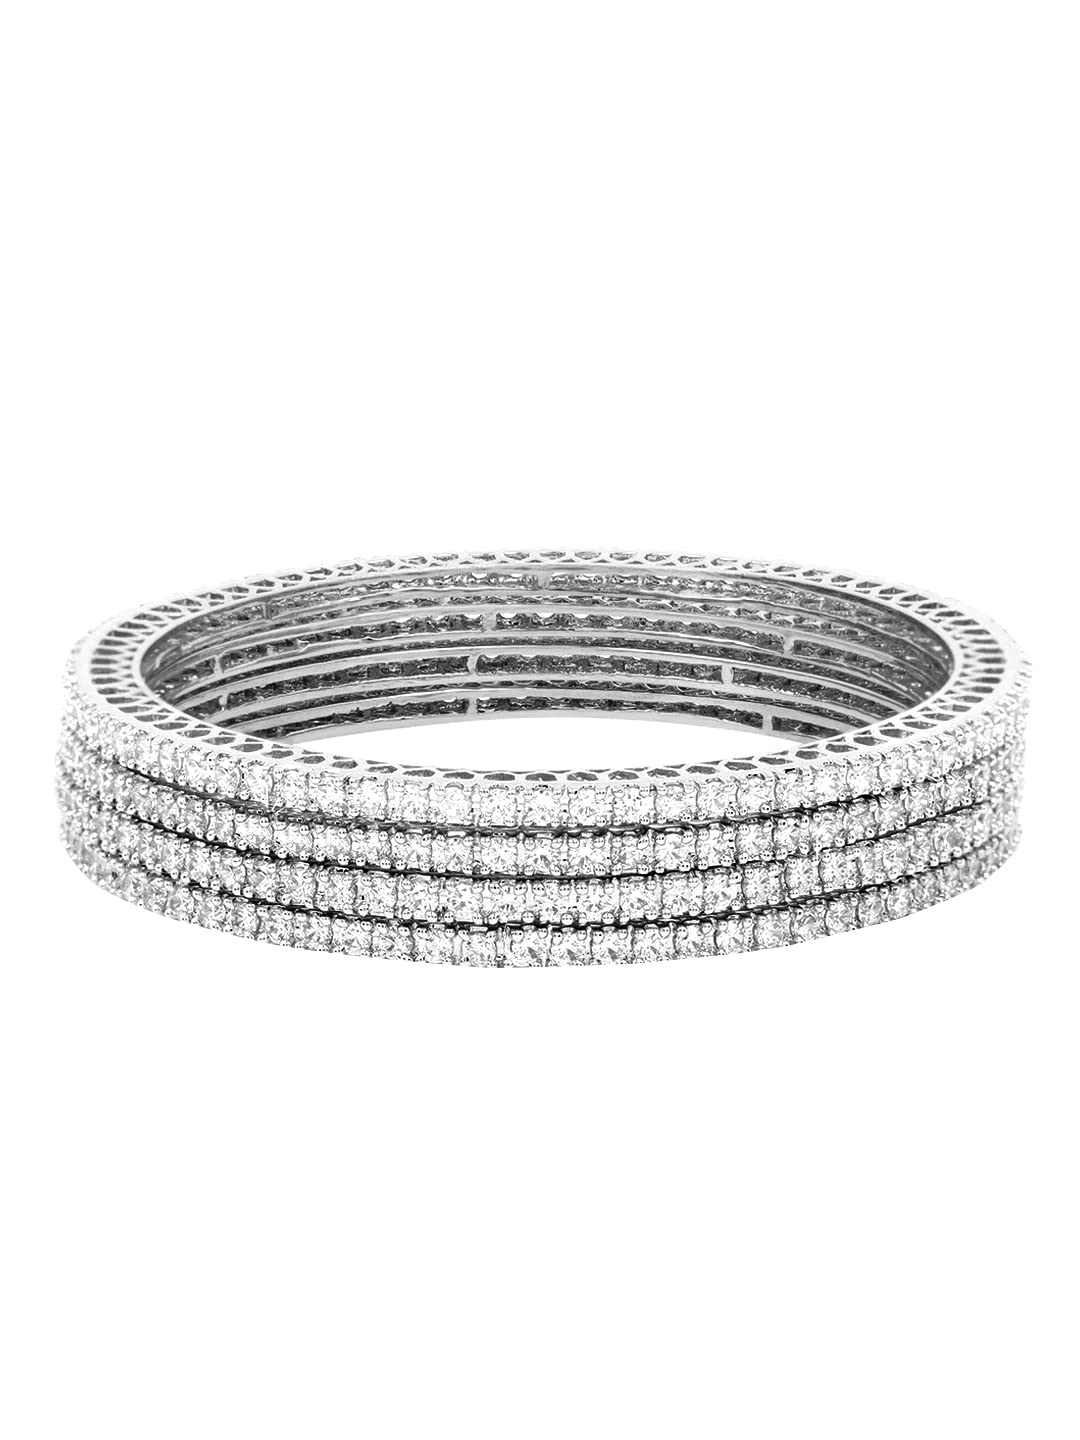 Yellow Chimes American Diamond Bangles for Women Silver Plated 4 PCs High Grade Authentic White AD Jewellery Bangles Set for Women and Girls